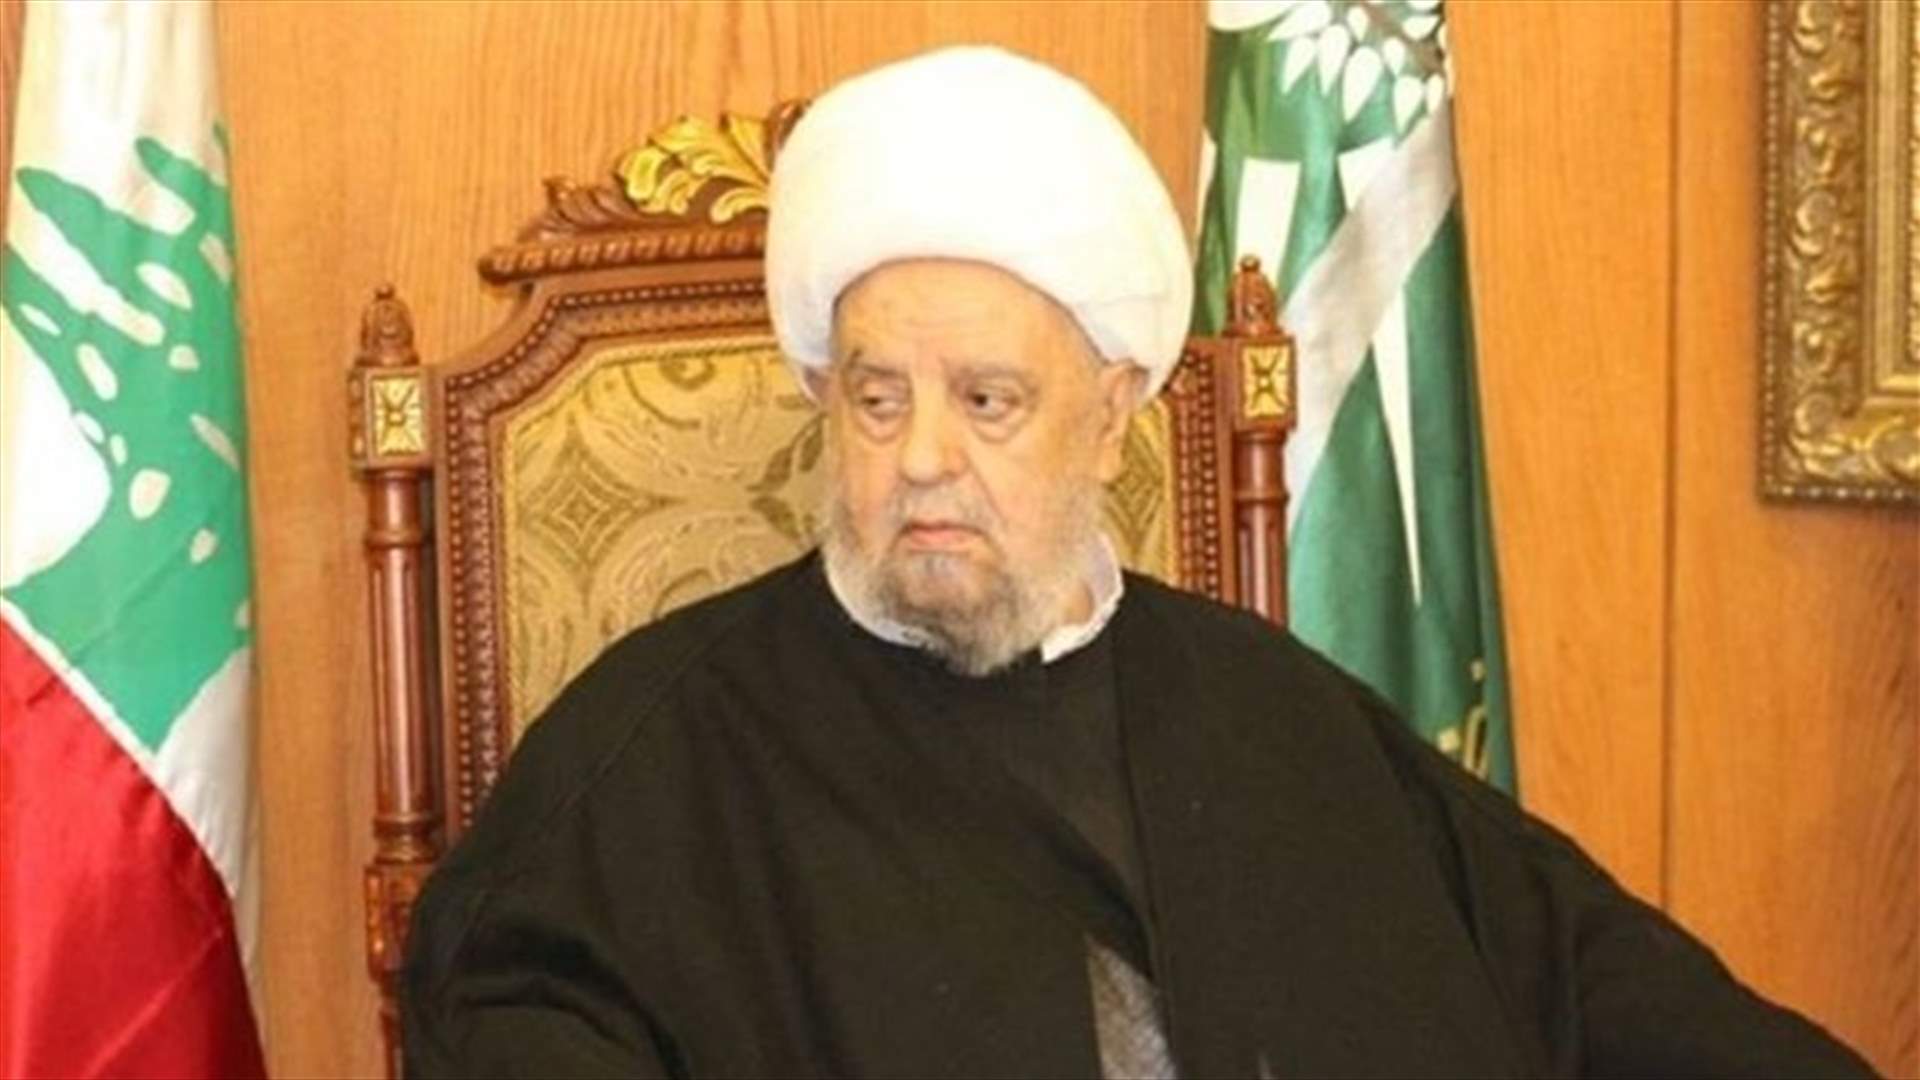 Lebanon declares two days of national mourning for death of Sheikh Qabalan